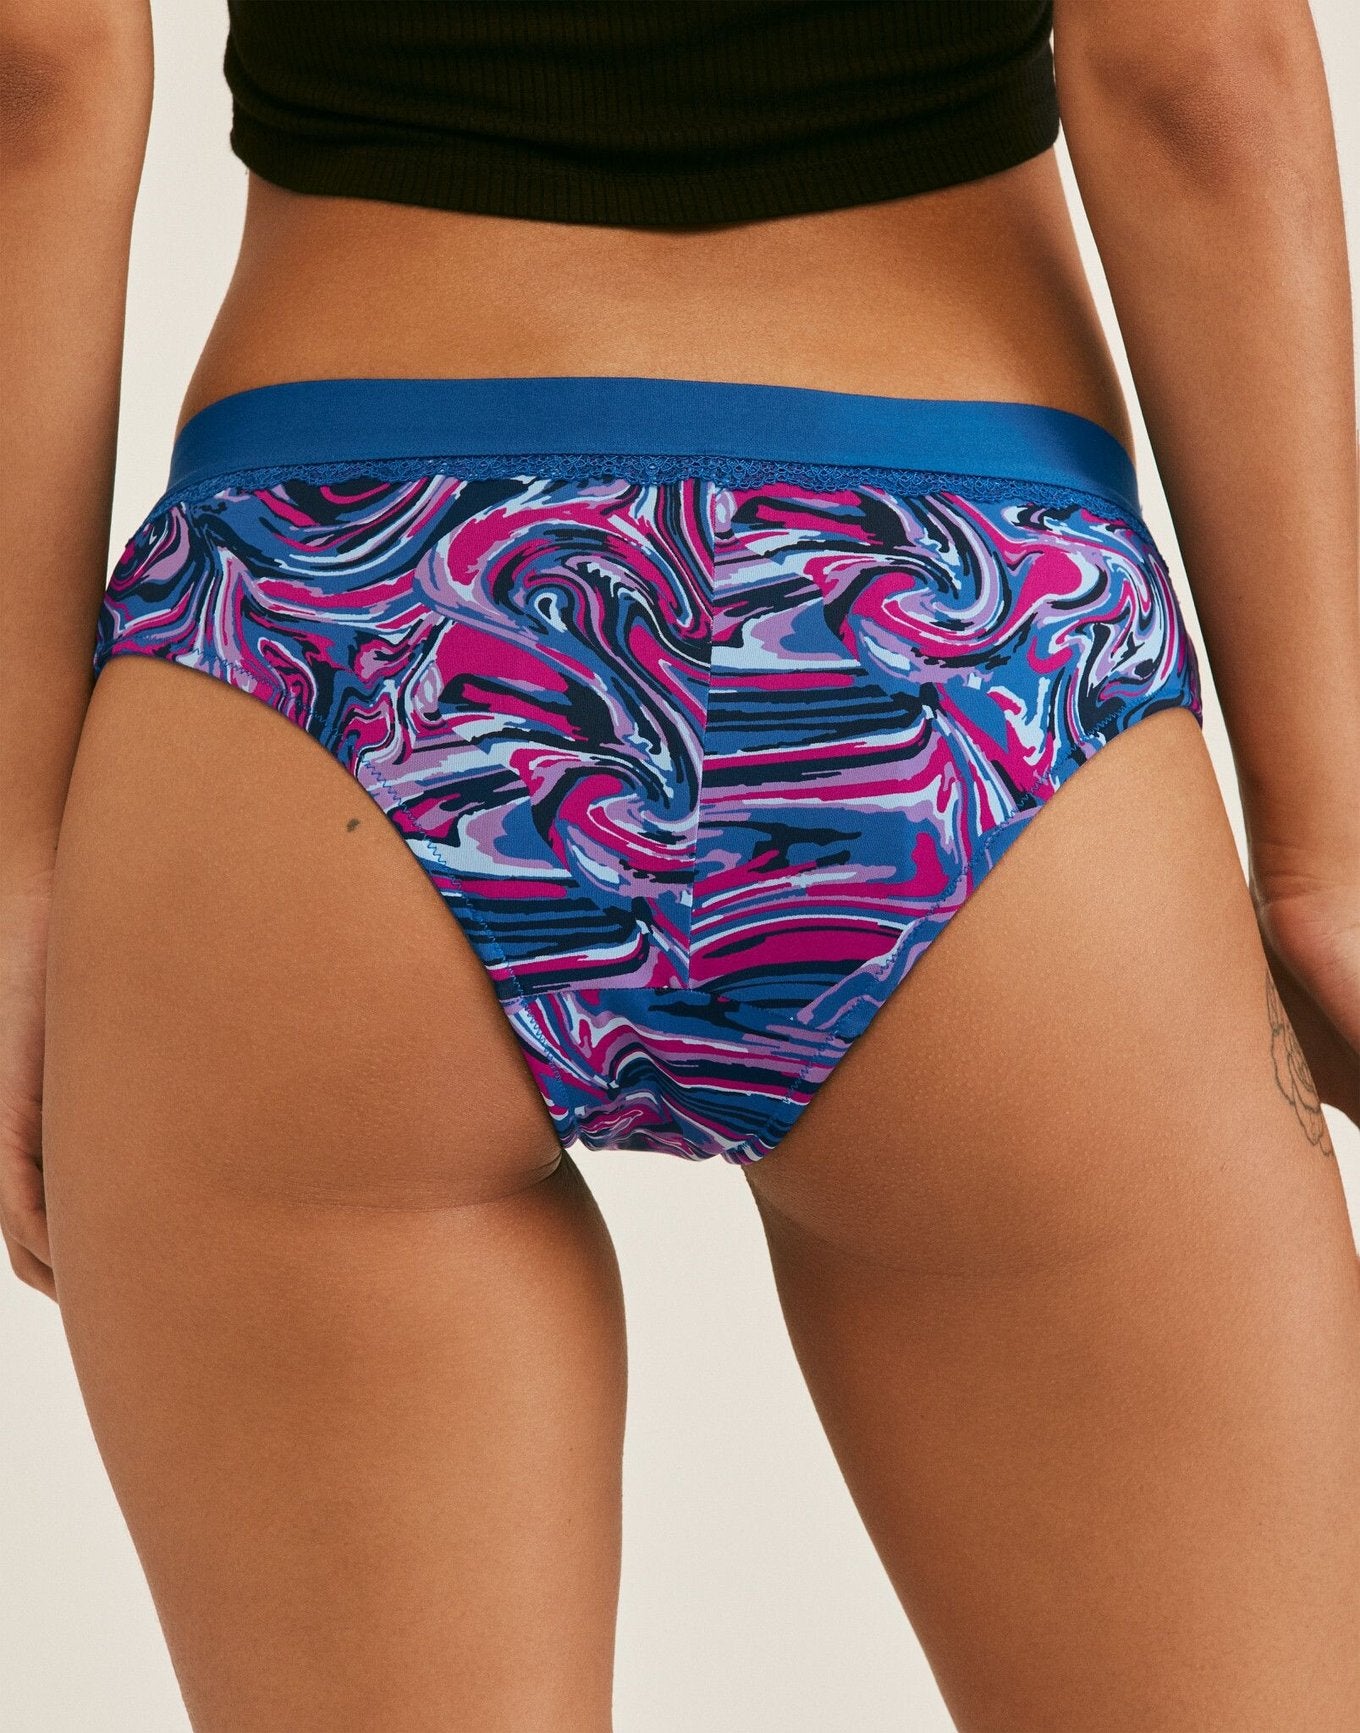 Joyja Cindy period-proof panty in color Marbled C01 and shape cheeky